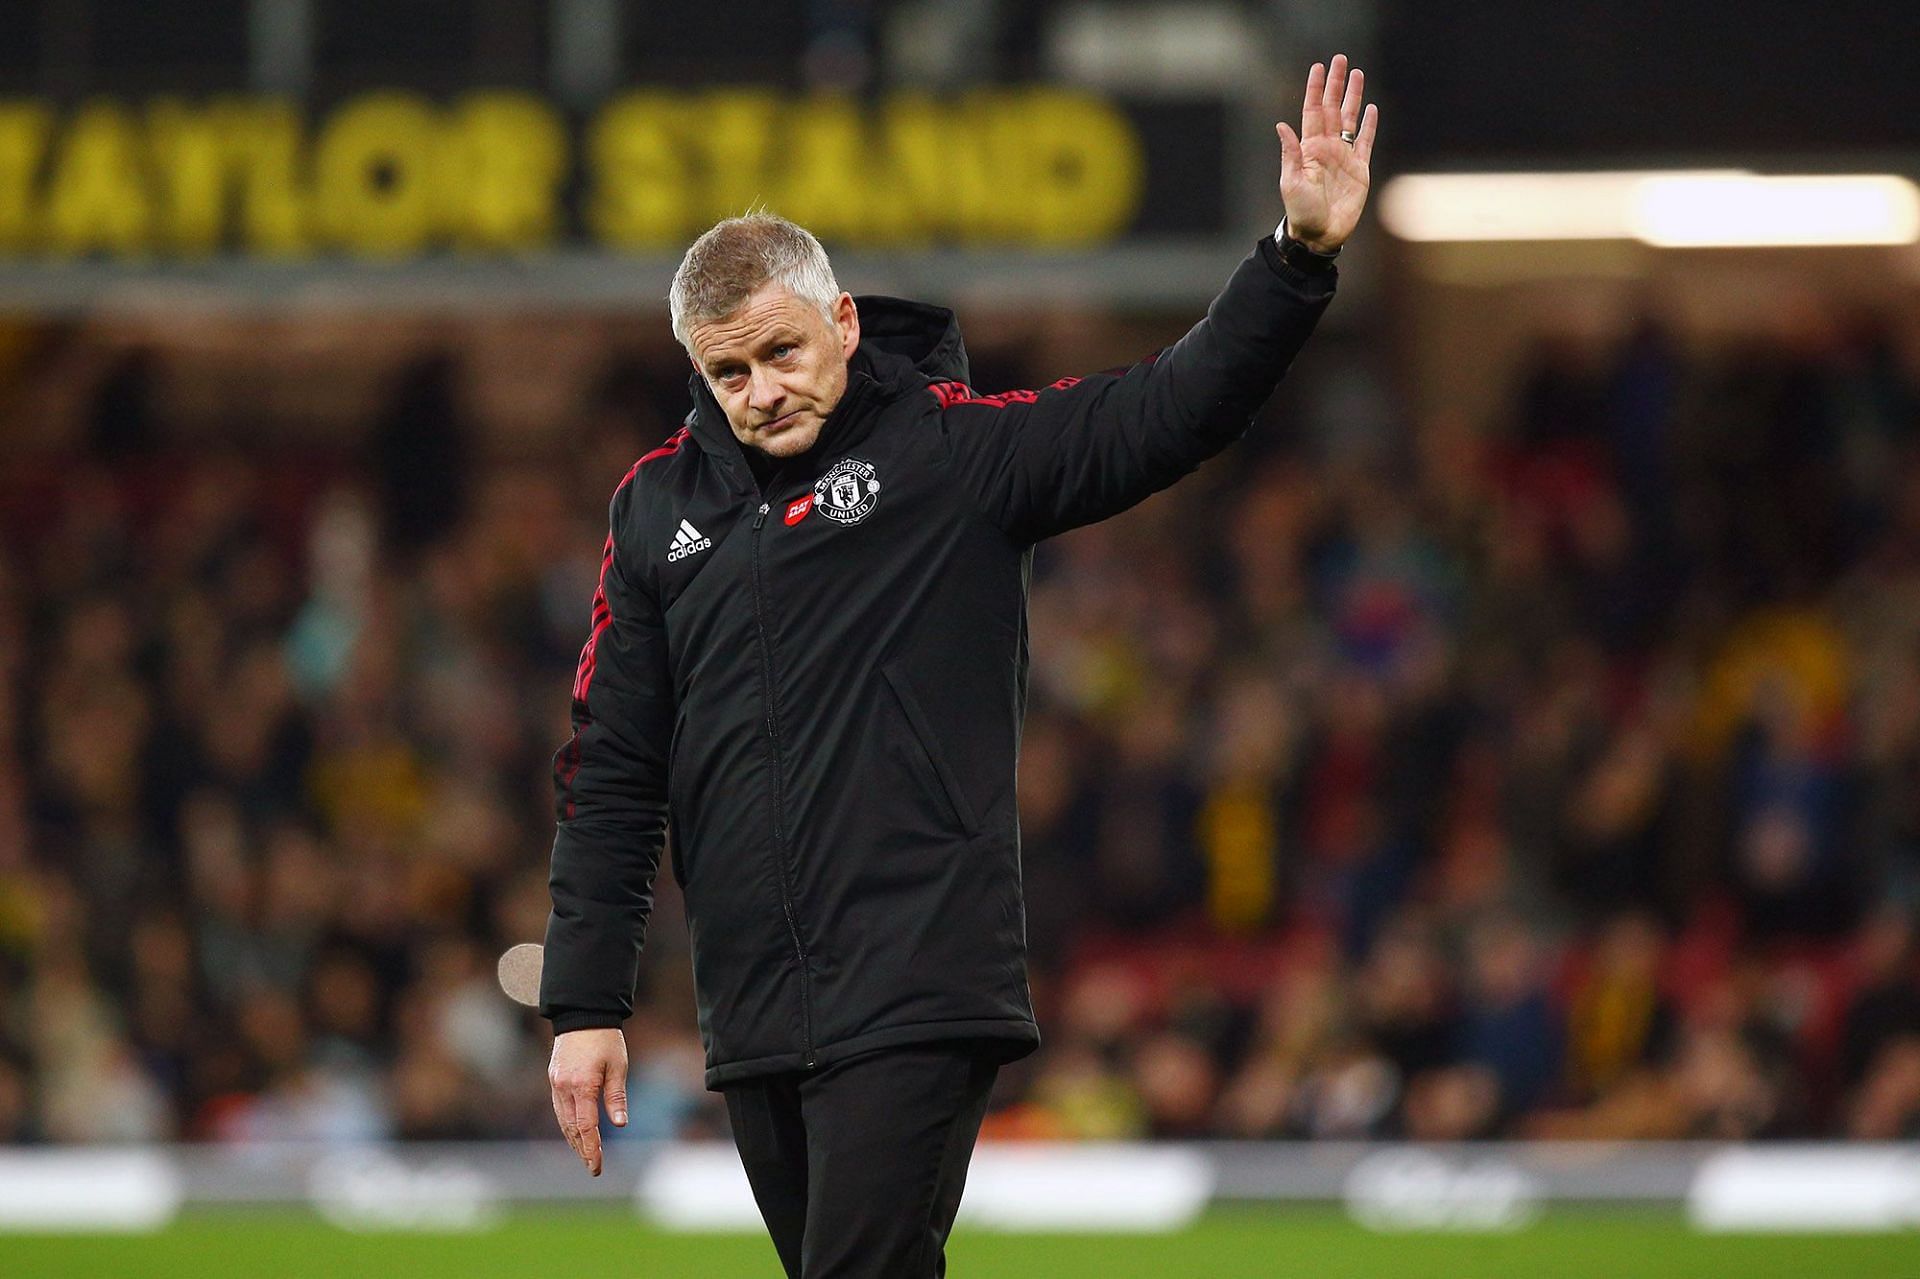 Solskjaer waves at United fans after what turned out to be his last game in-charge